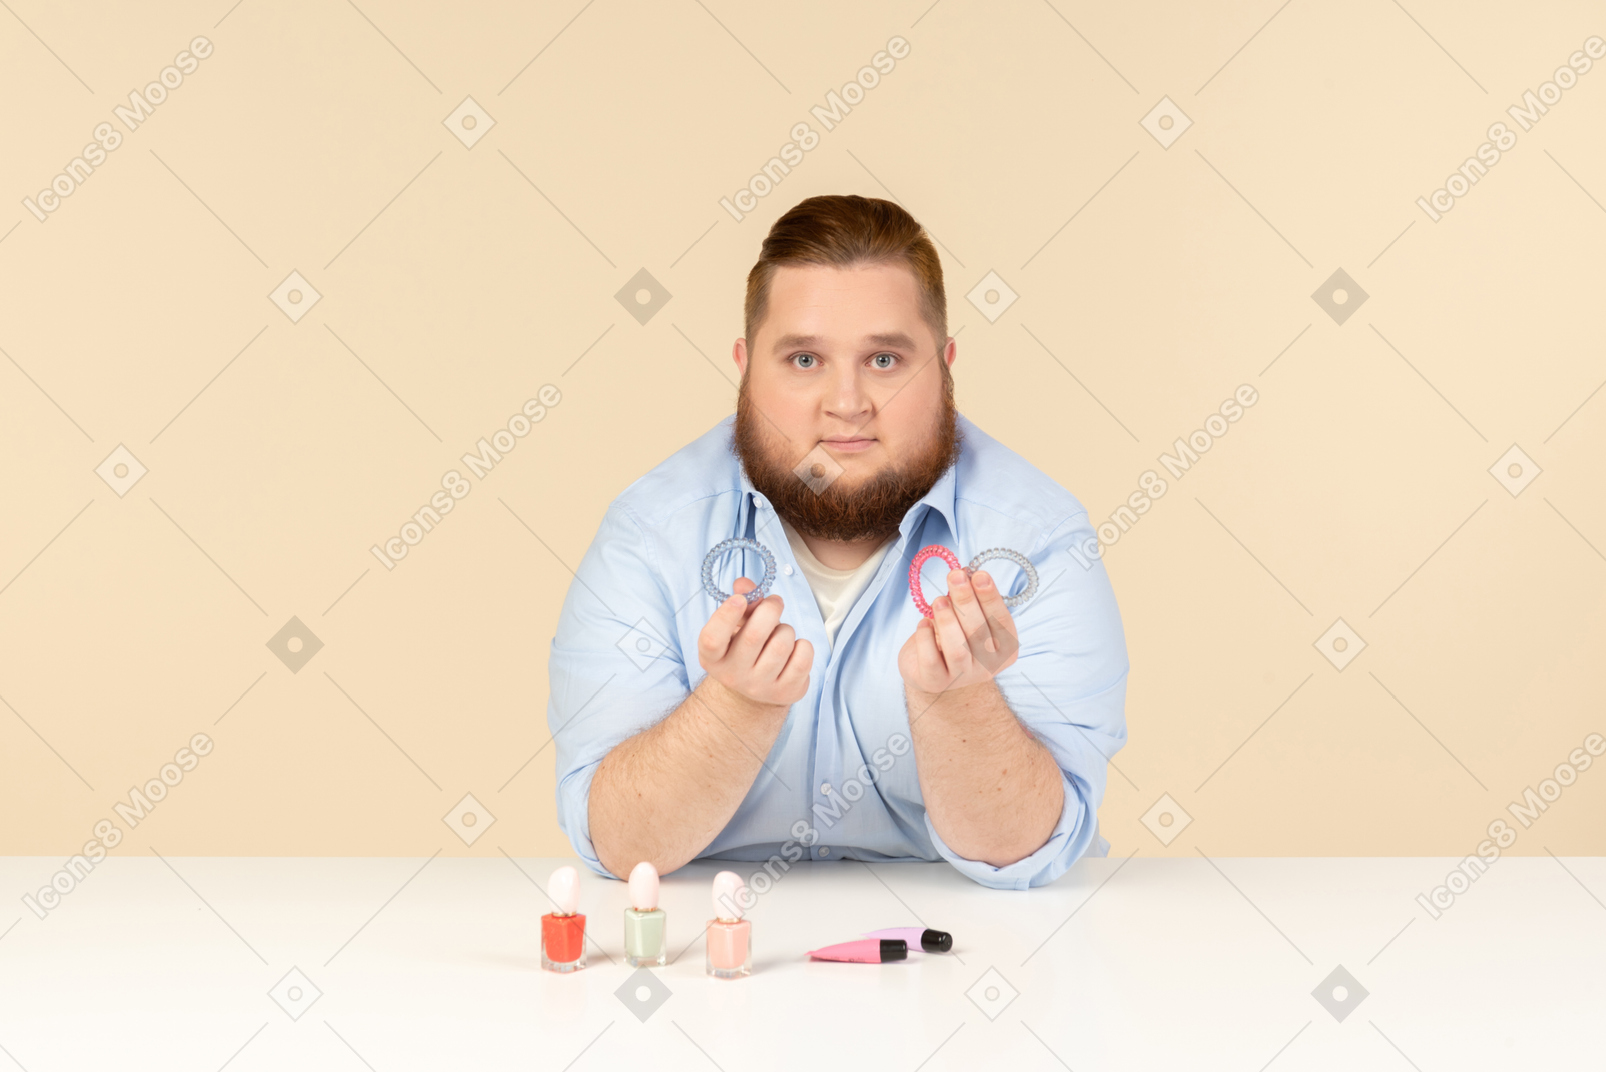 Big man sitting at the table and holding hair bands